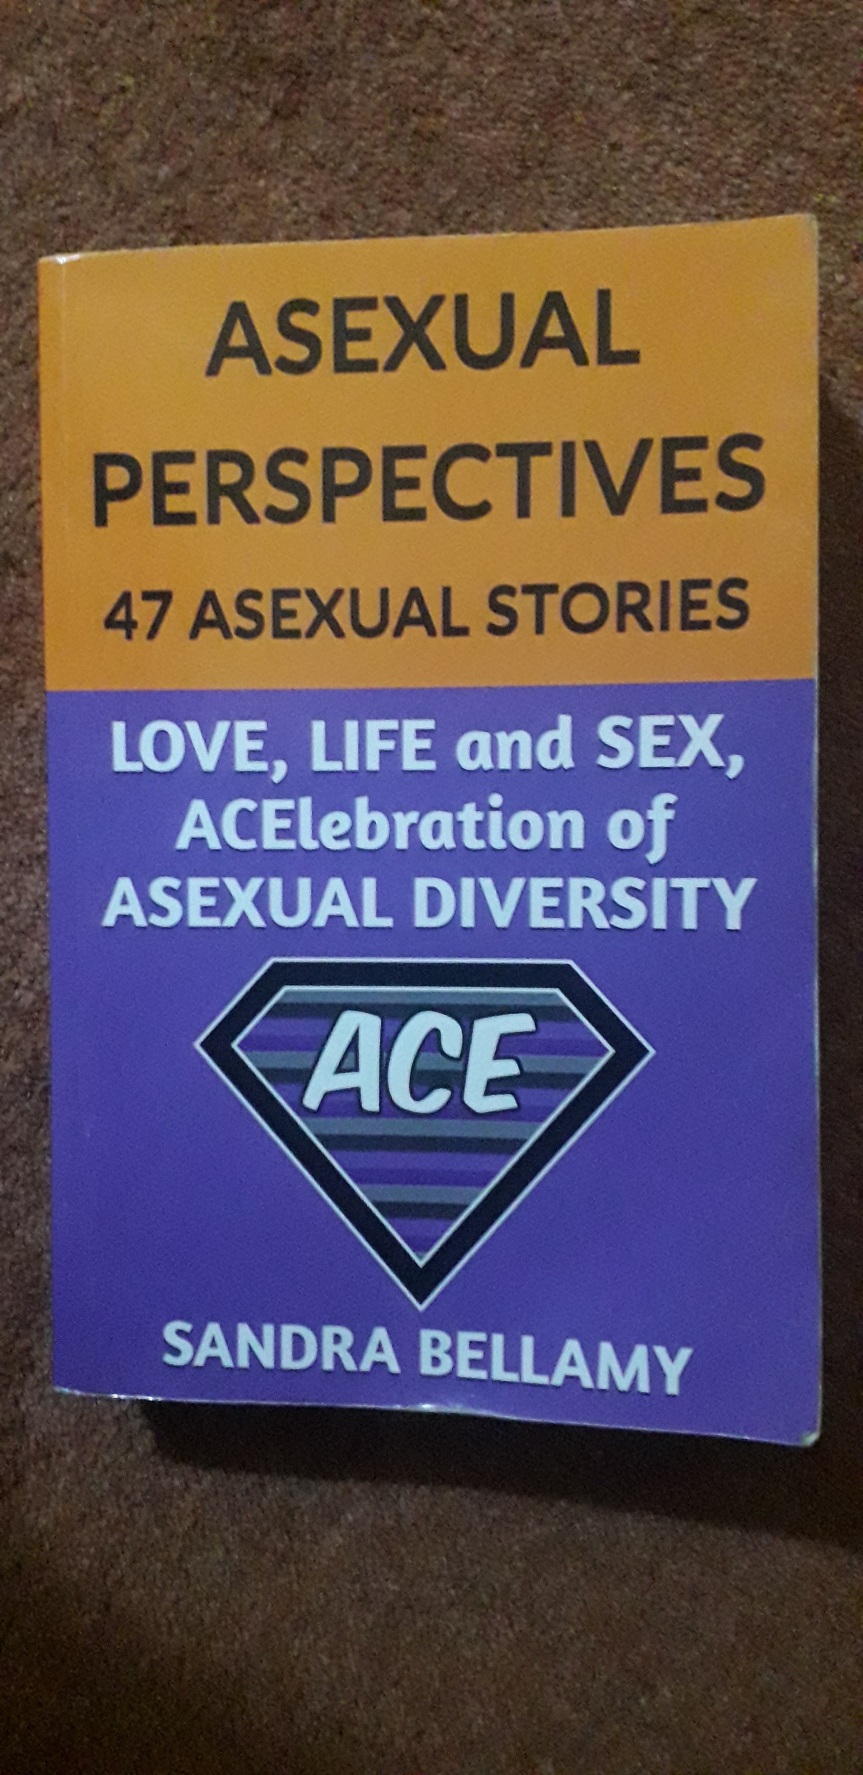 Asexual Perspectives by Sandra Bellamy (Book Review)